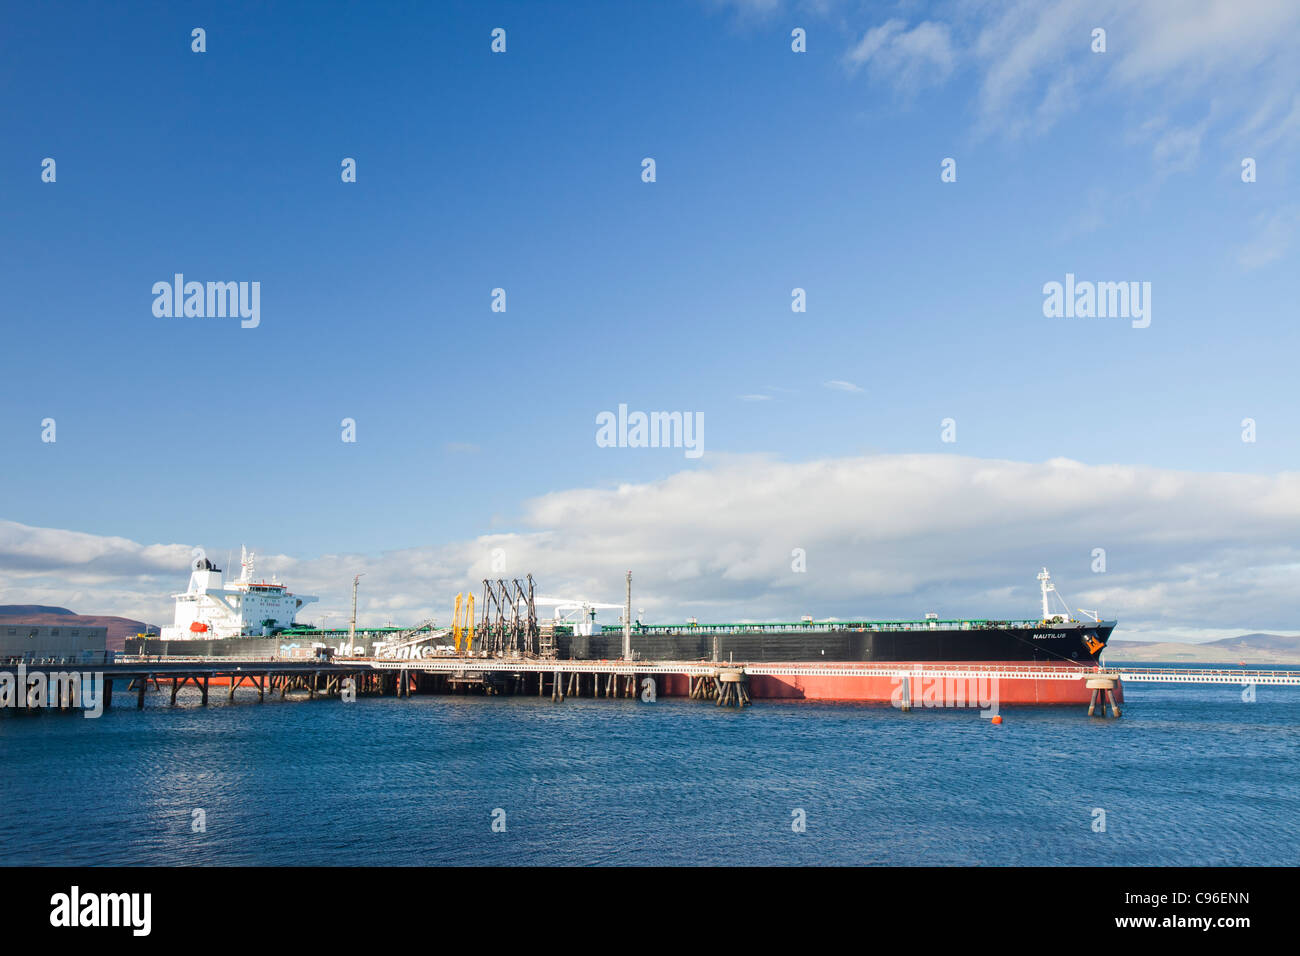 A Greek oil tanker docked at the Flotta oil terminal on the Island of Flotta in the Orkney's Scotland, UK. Stock Photo